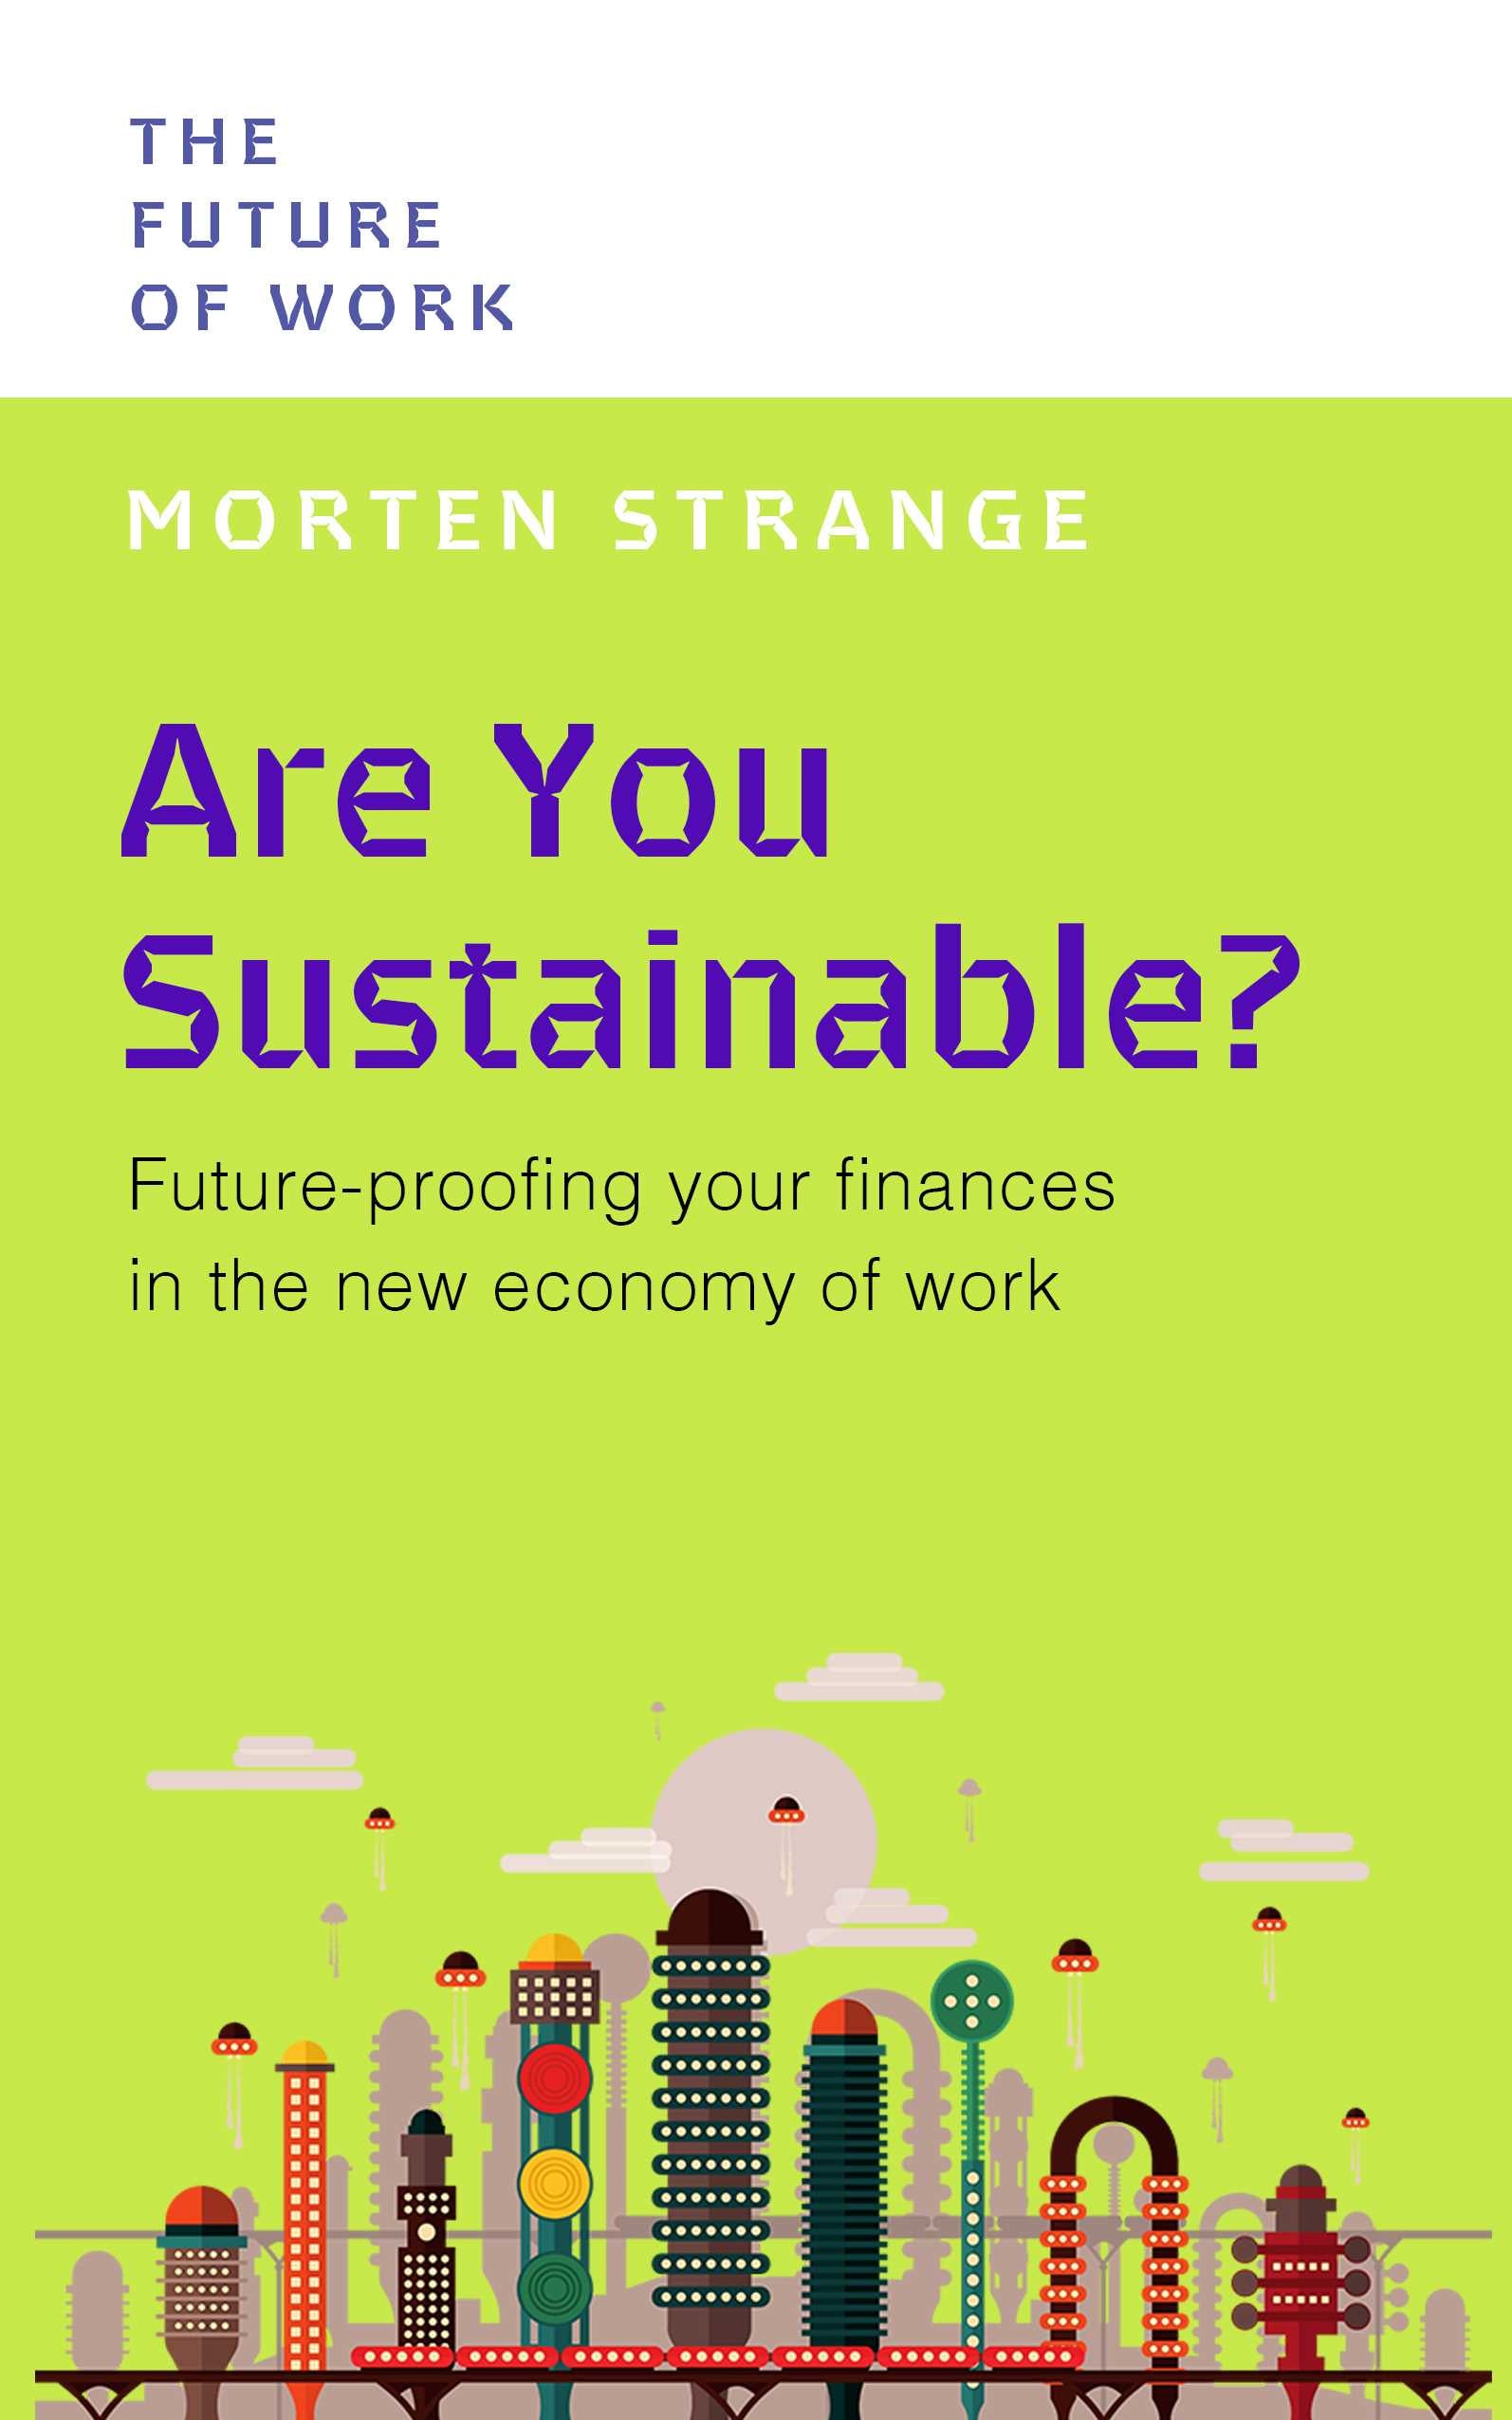 Are You Sustainable? Future-Proofing Your Finances in the New Economy of Work